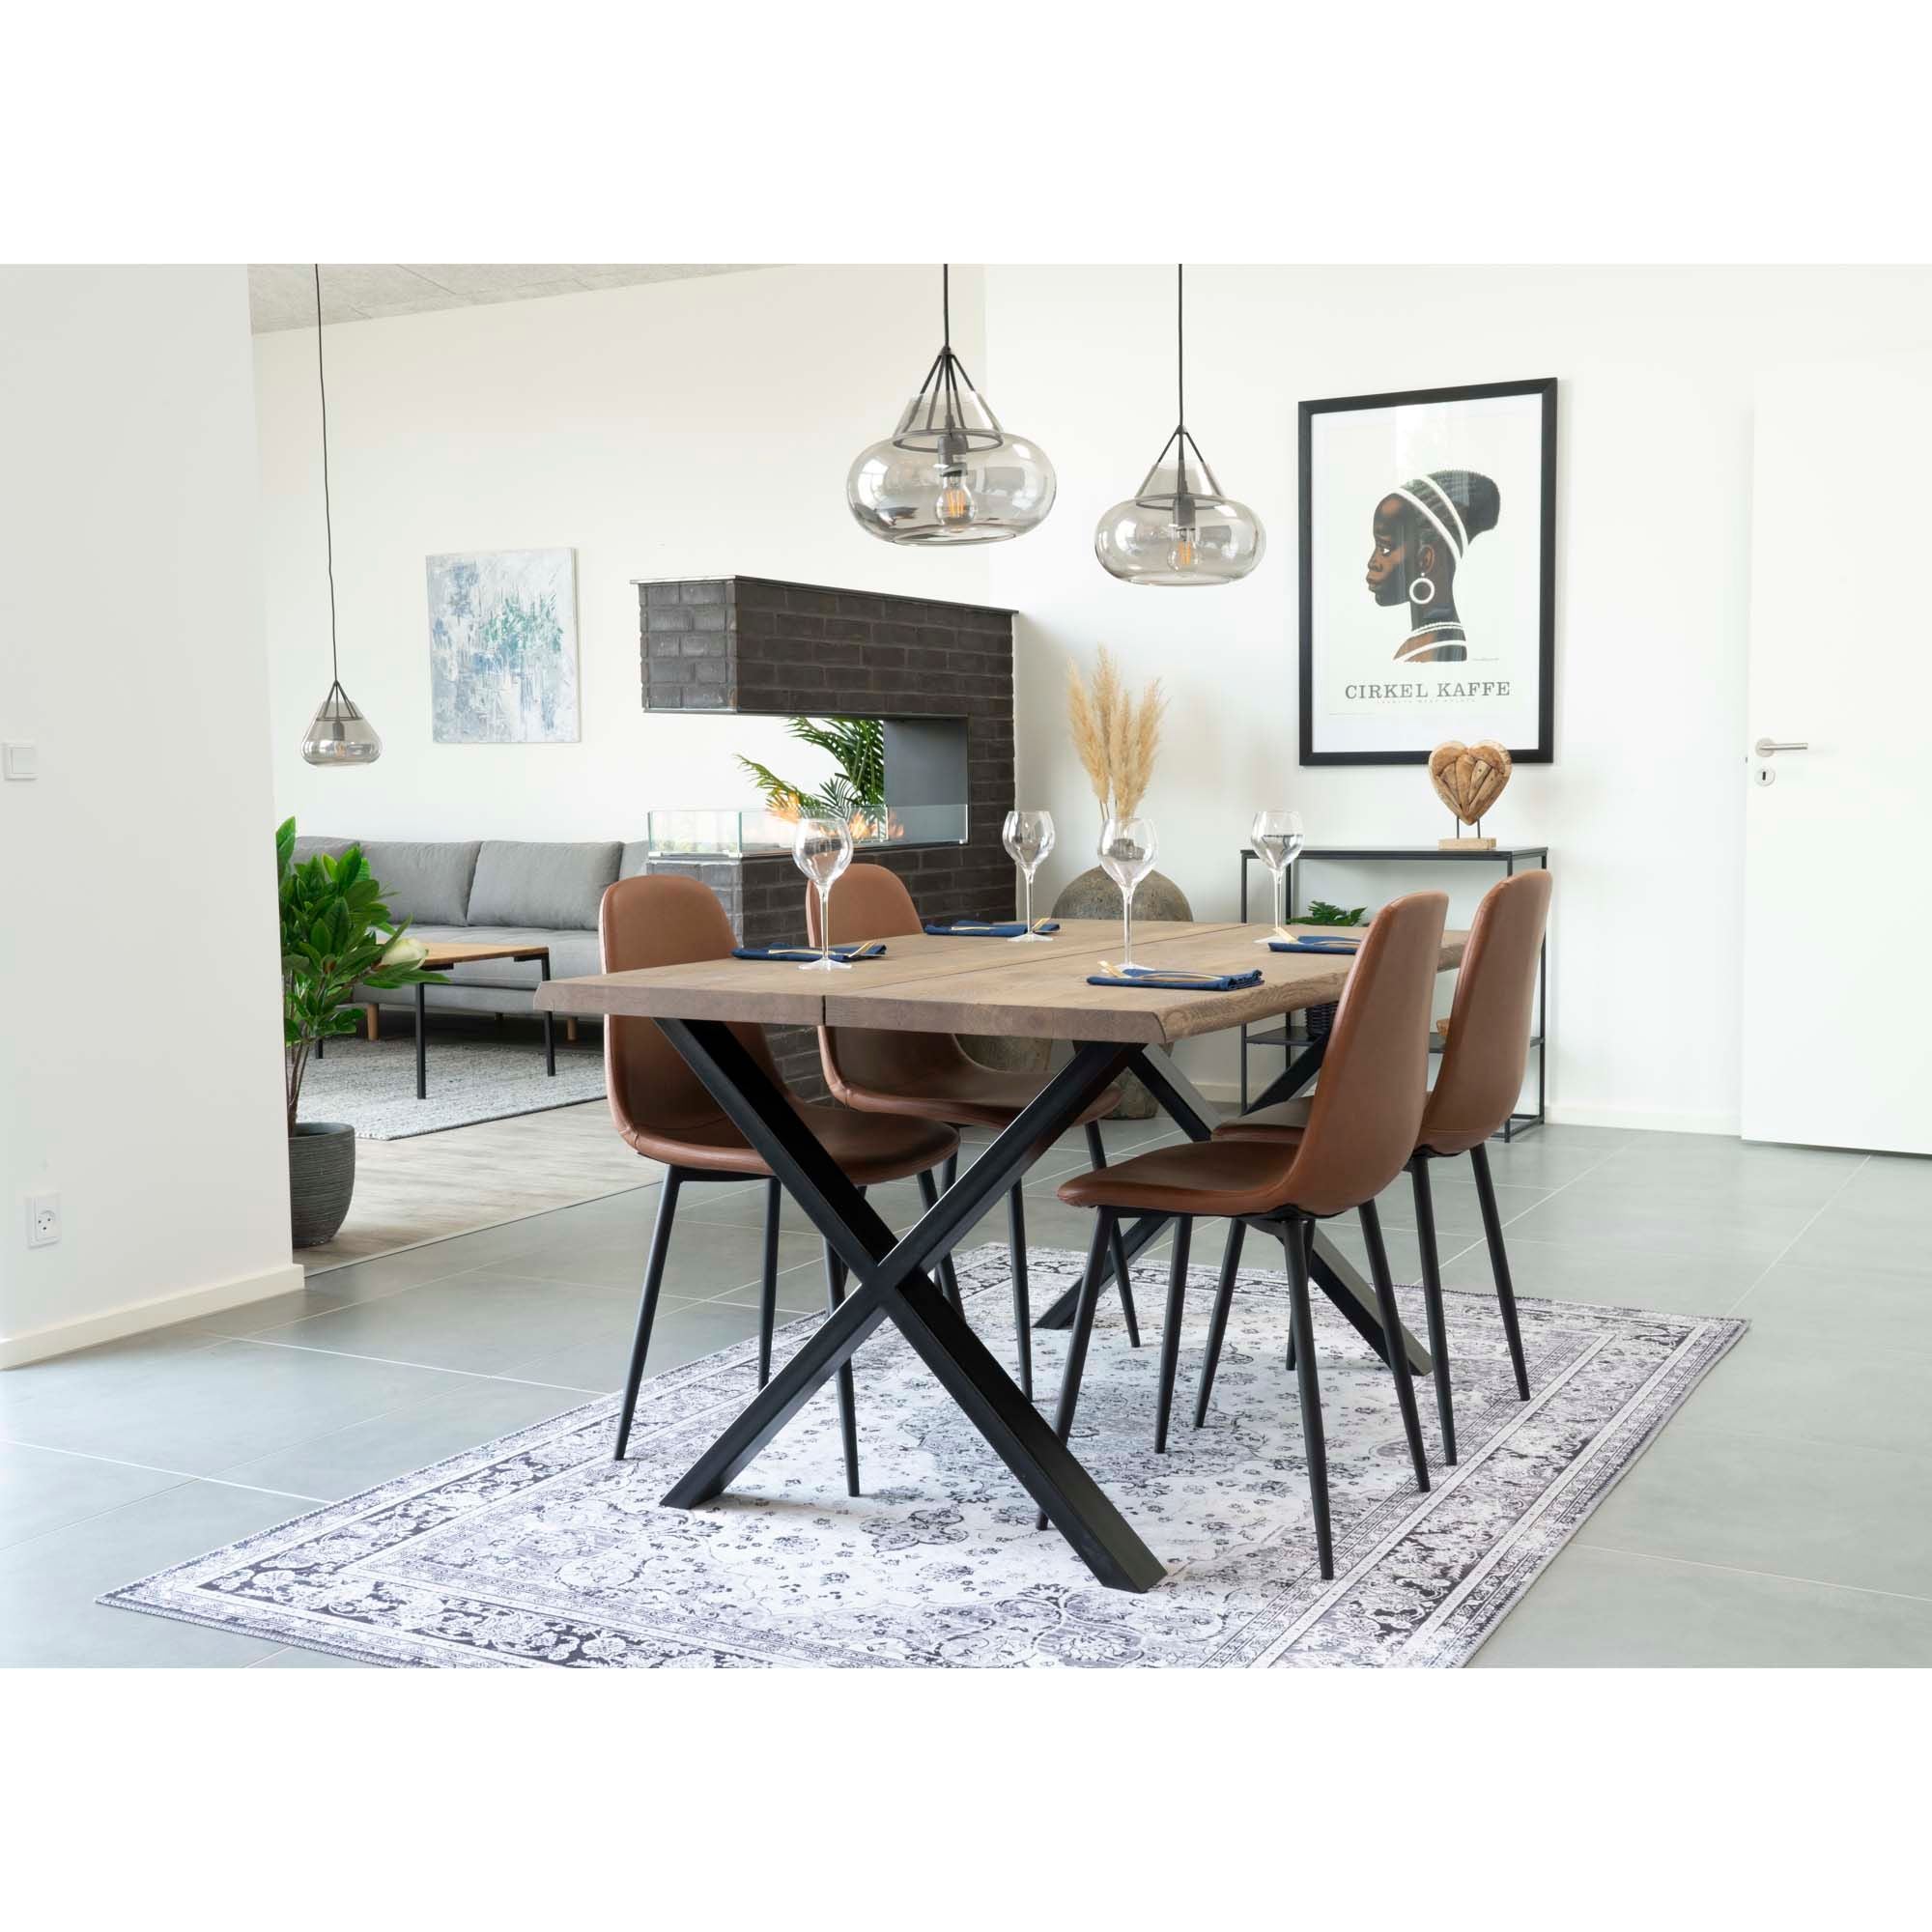 House Nordic - Stockholm Dining Table Chair